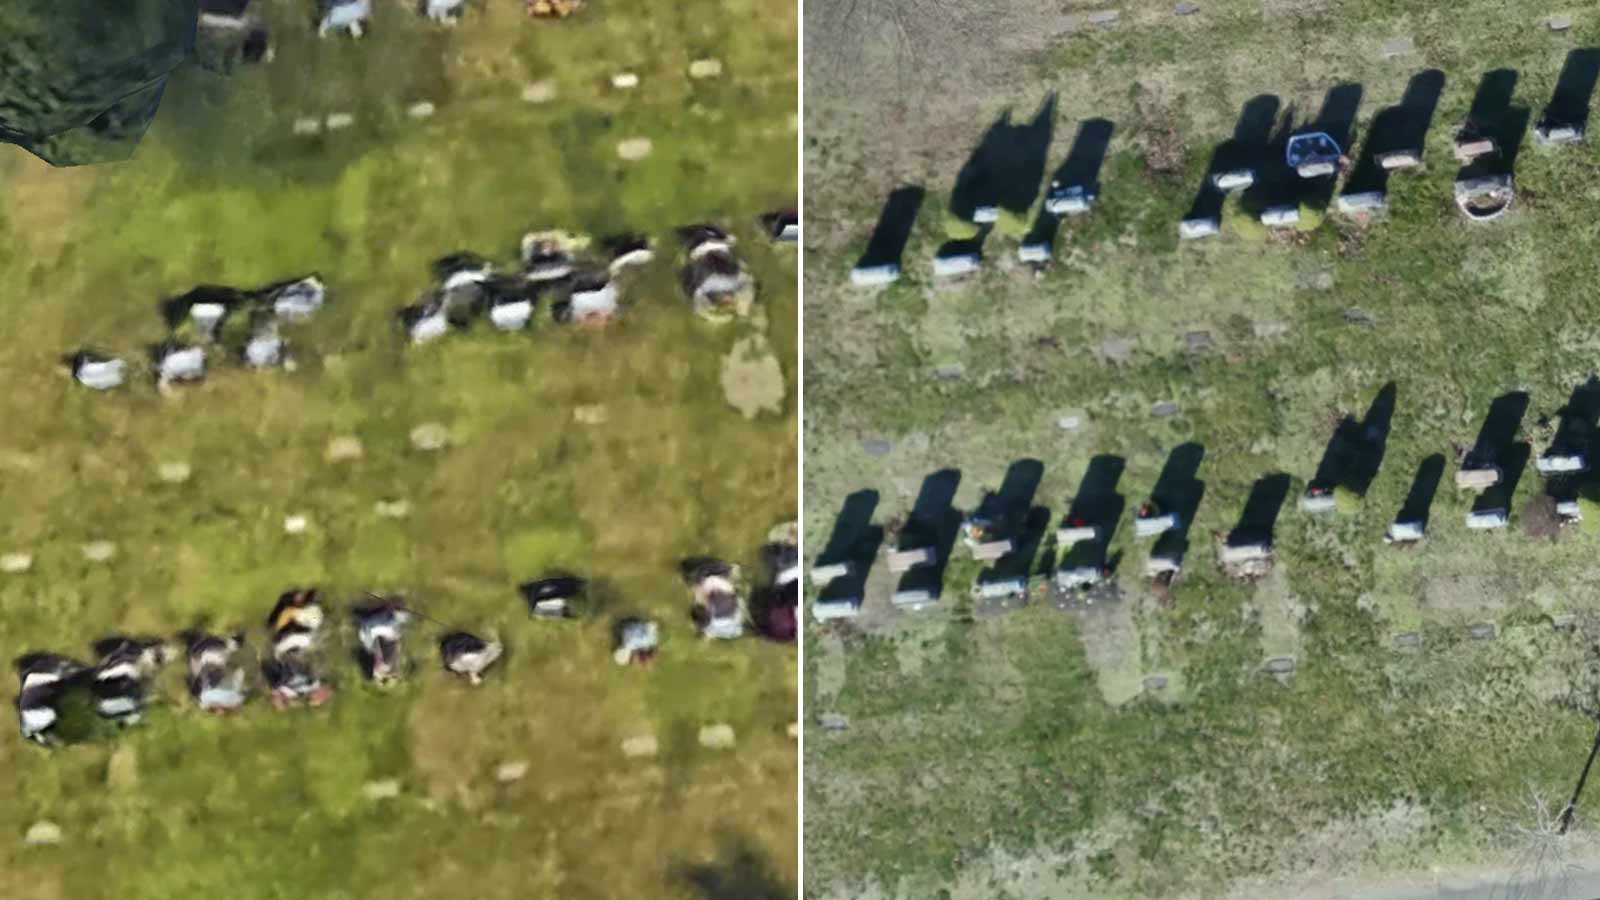 Forest Glade cemetery from Google earth on the left and from Civilview orthomosaic on the right